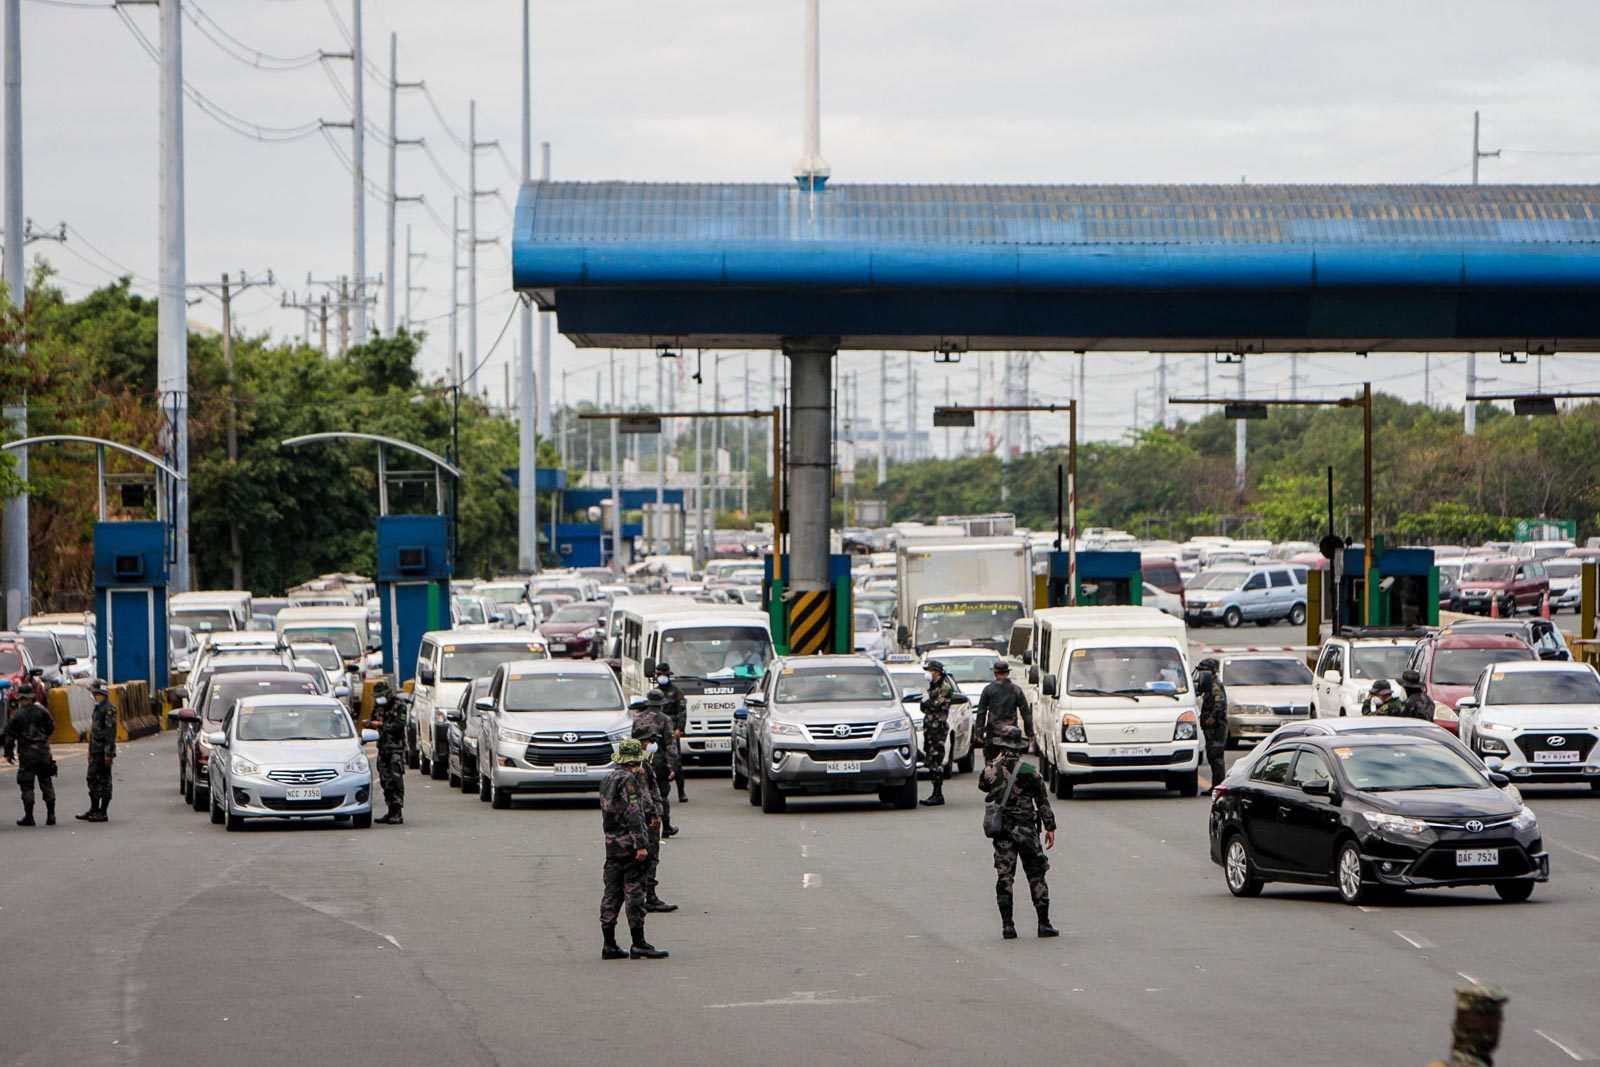 Gov’t using QR system to speed up passage of frontliners at checkpoints